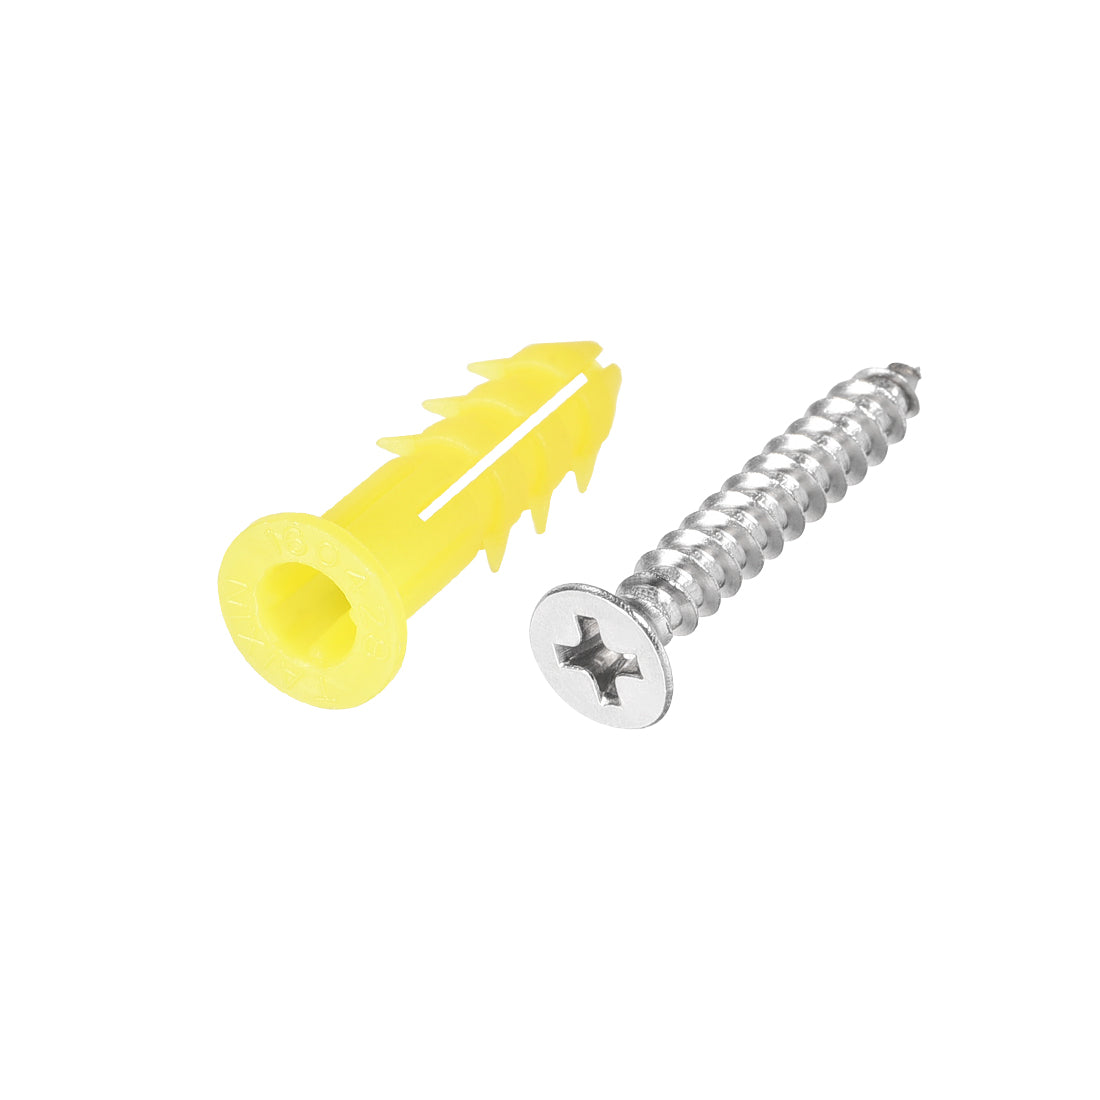 uxcell Uxcell 6mmx26mm Plastic Expansion Tube for Drywall with Screws, Yellow 20pcs